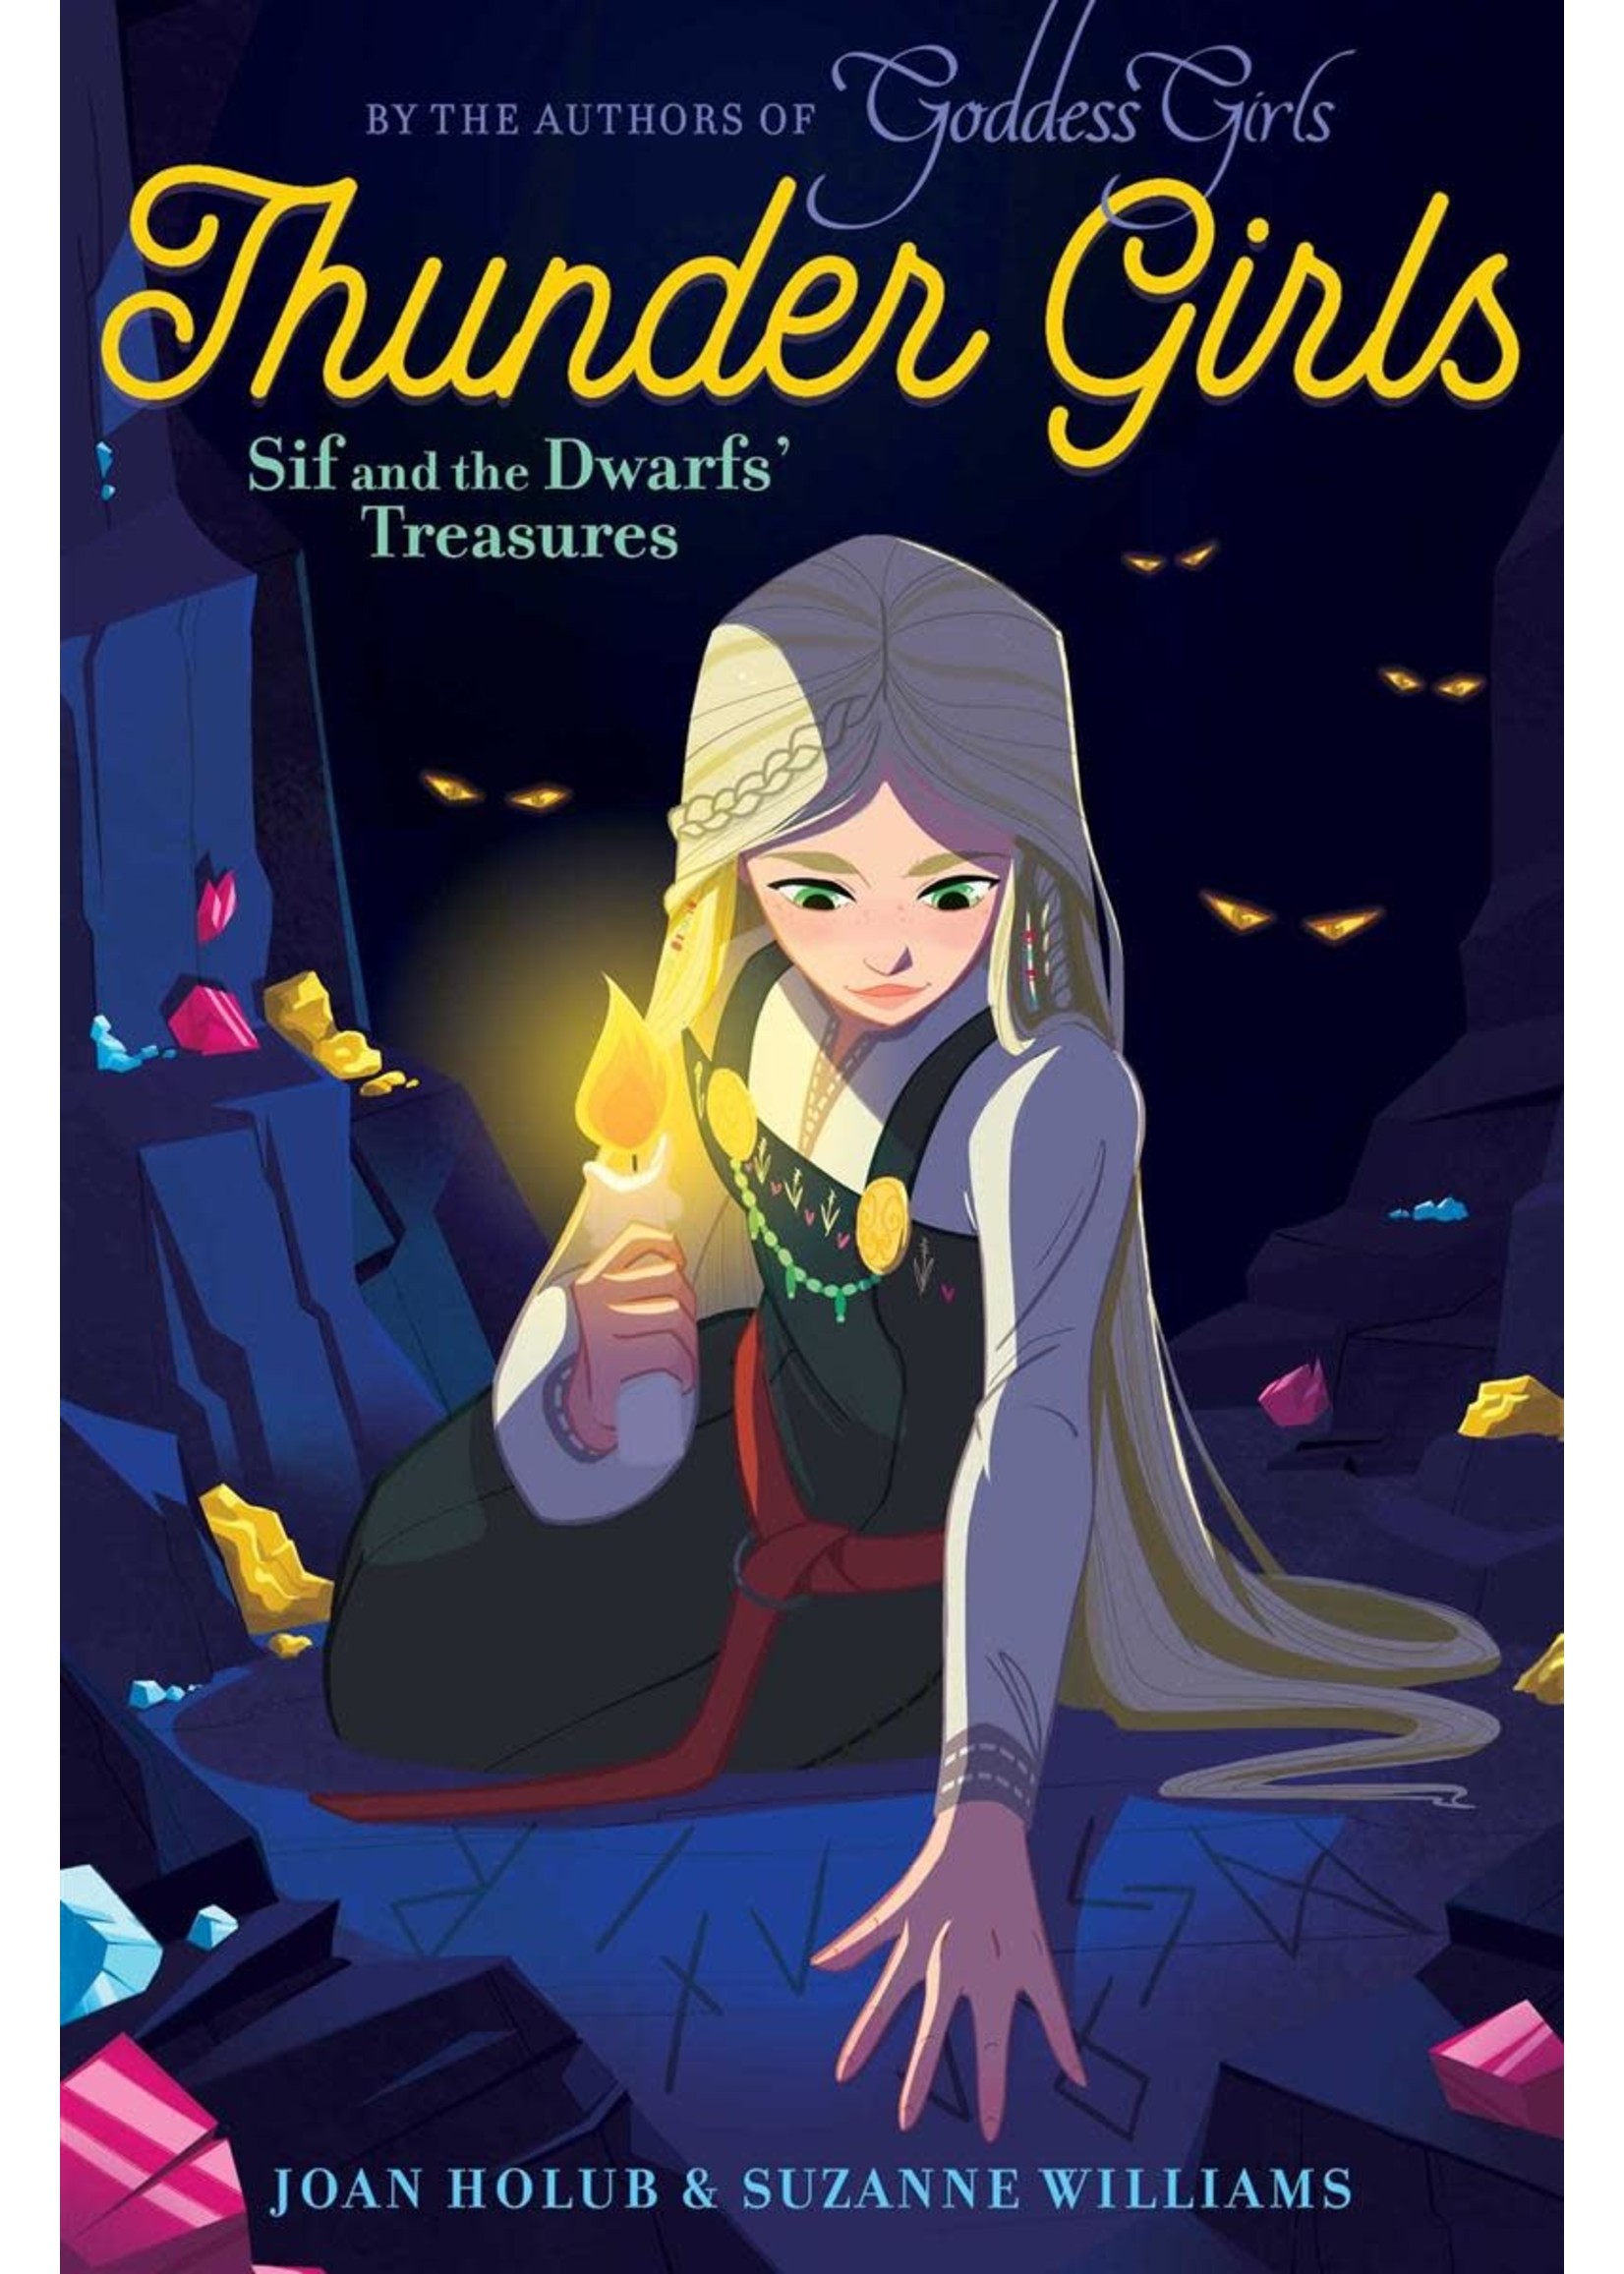 Sif and the Dwarfs' Treasures (Thunder Girls #2) by Joan Holub, Suzanne Williams